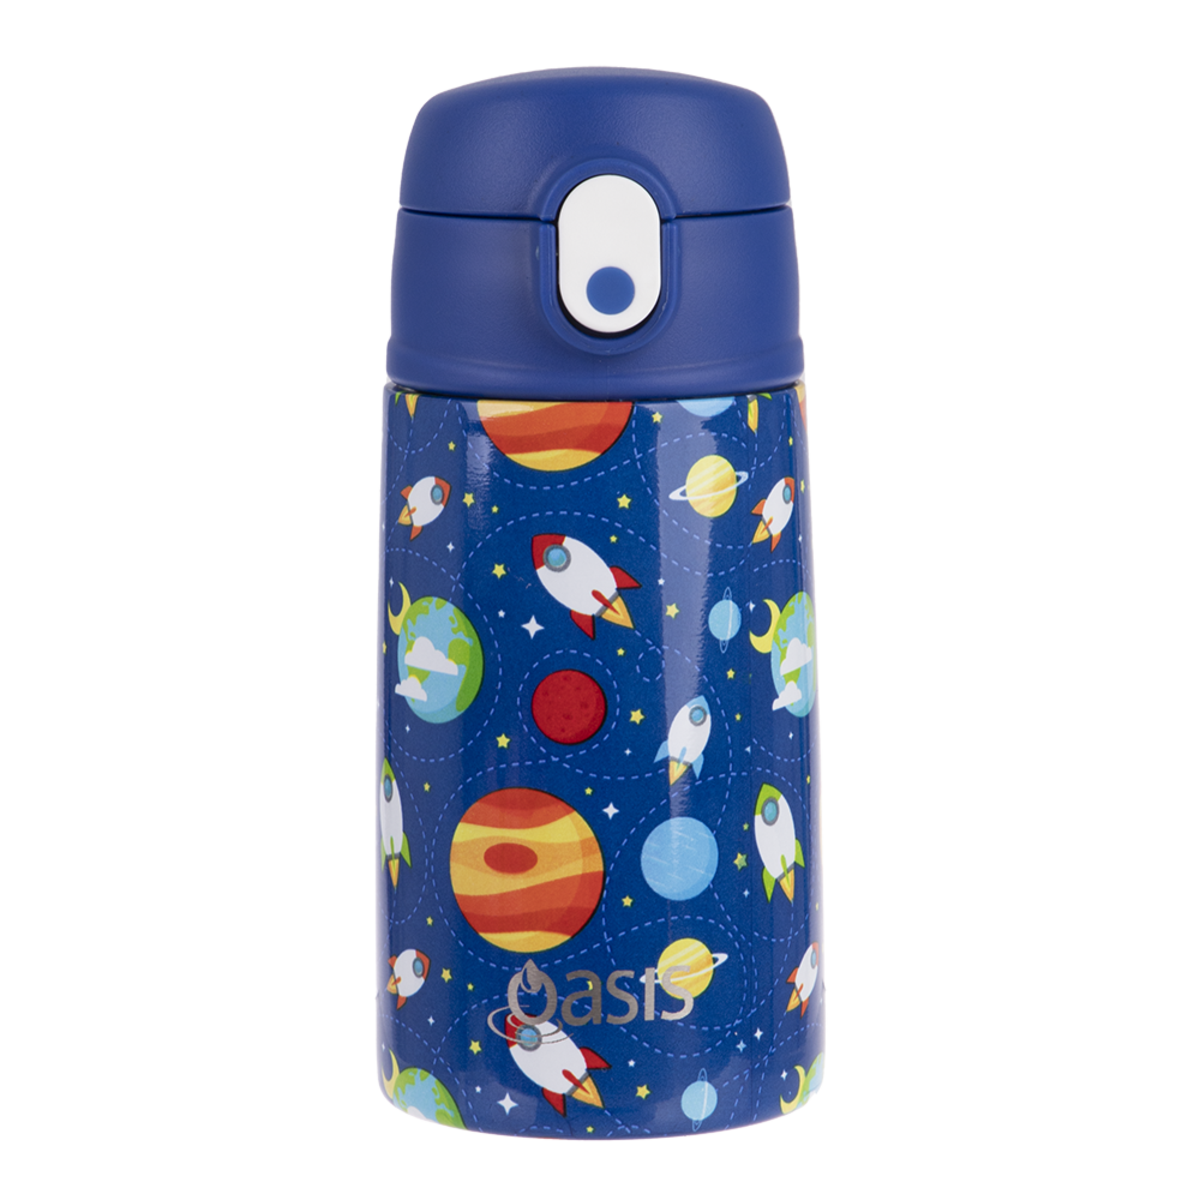 oasis stainless steel double wall insulated kid's drink bottle w/sipper 400ML - outer space